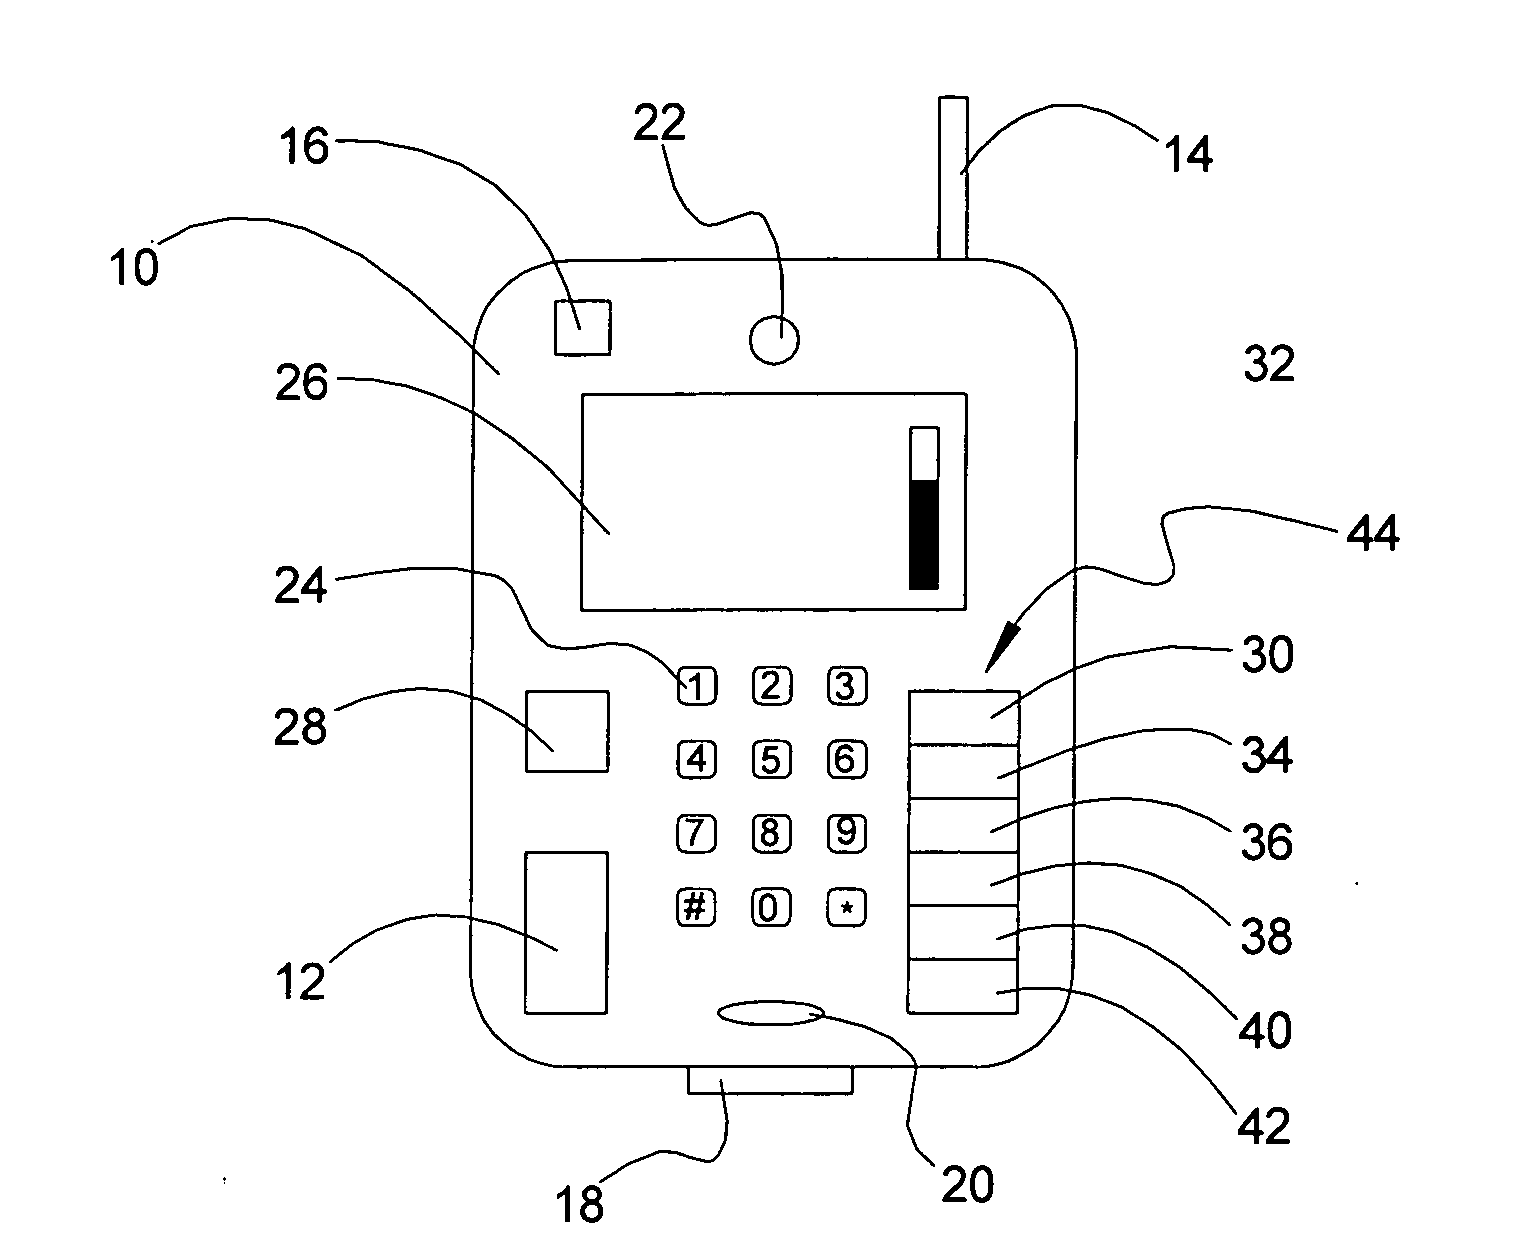 Battery charge status indicator for user terminal device